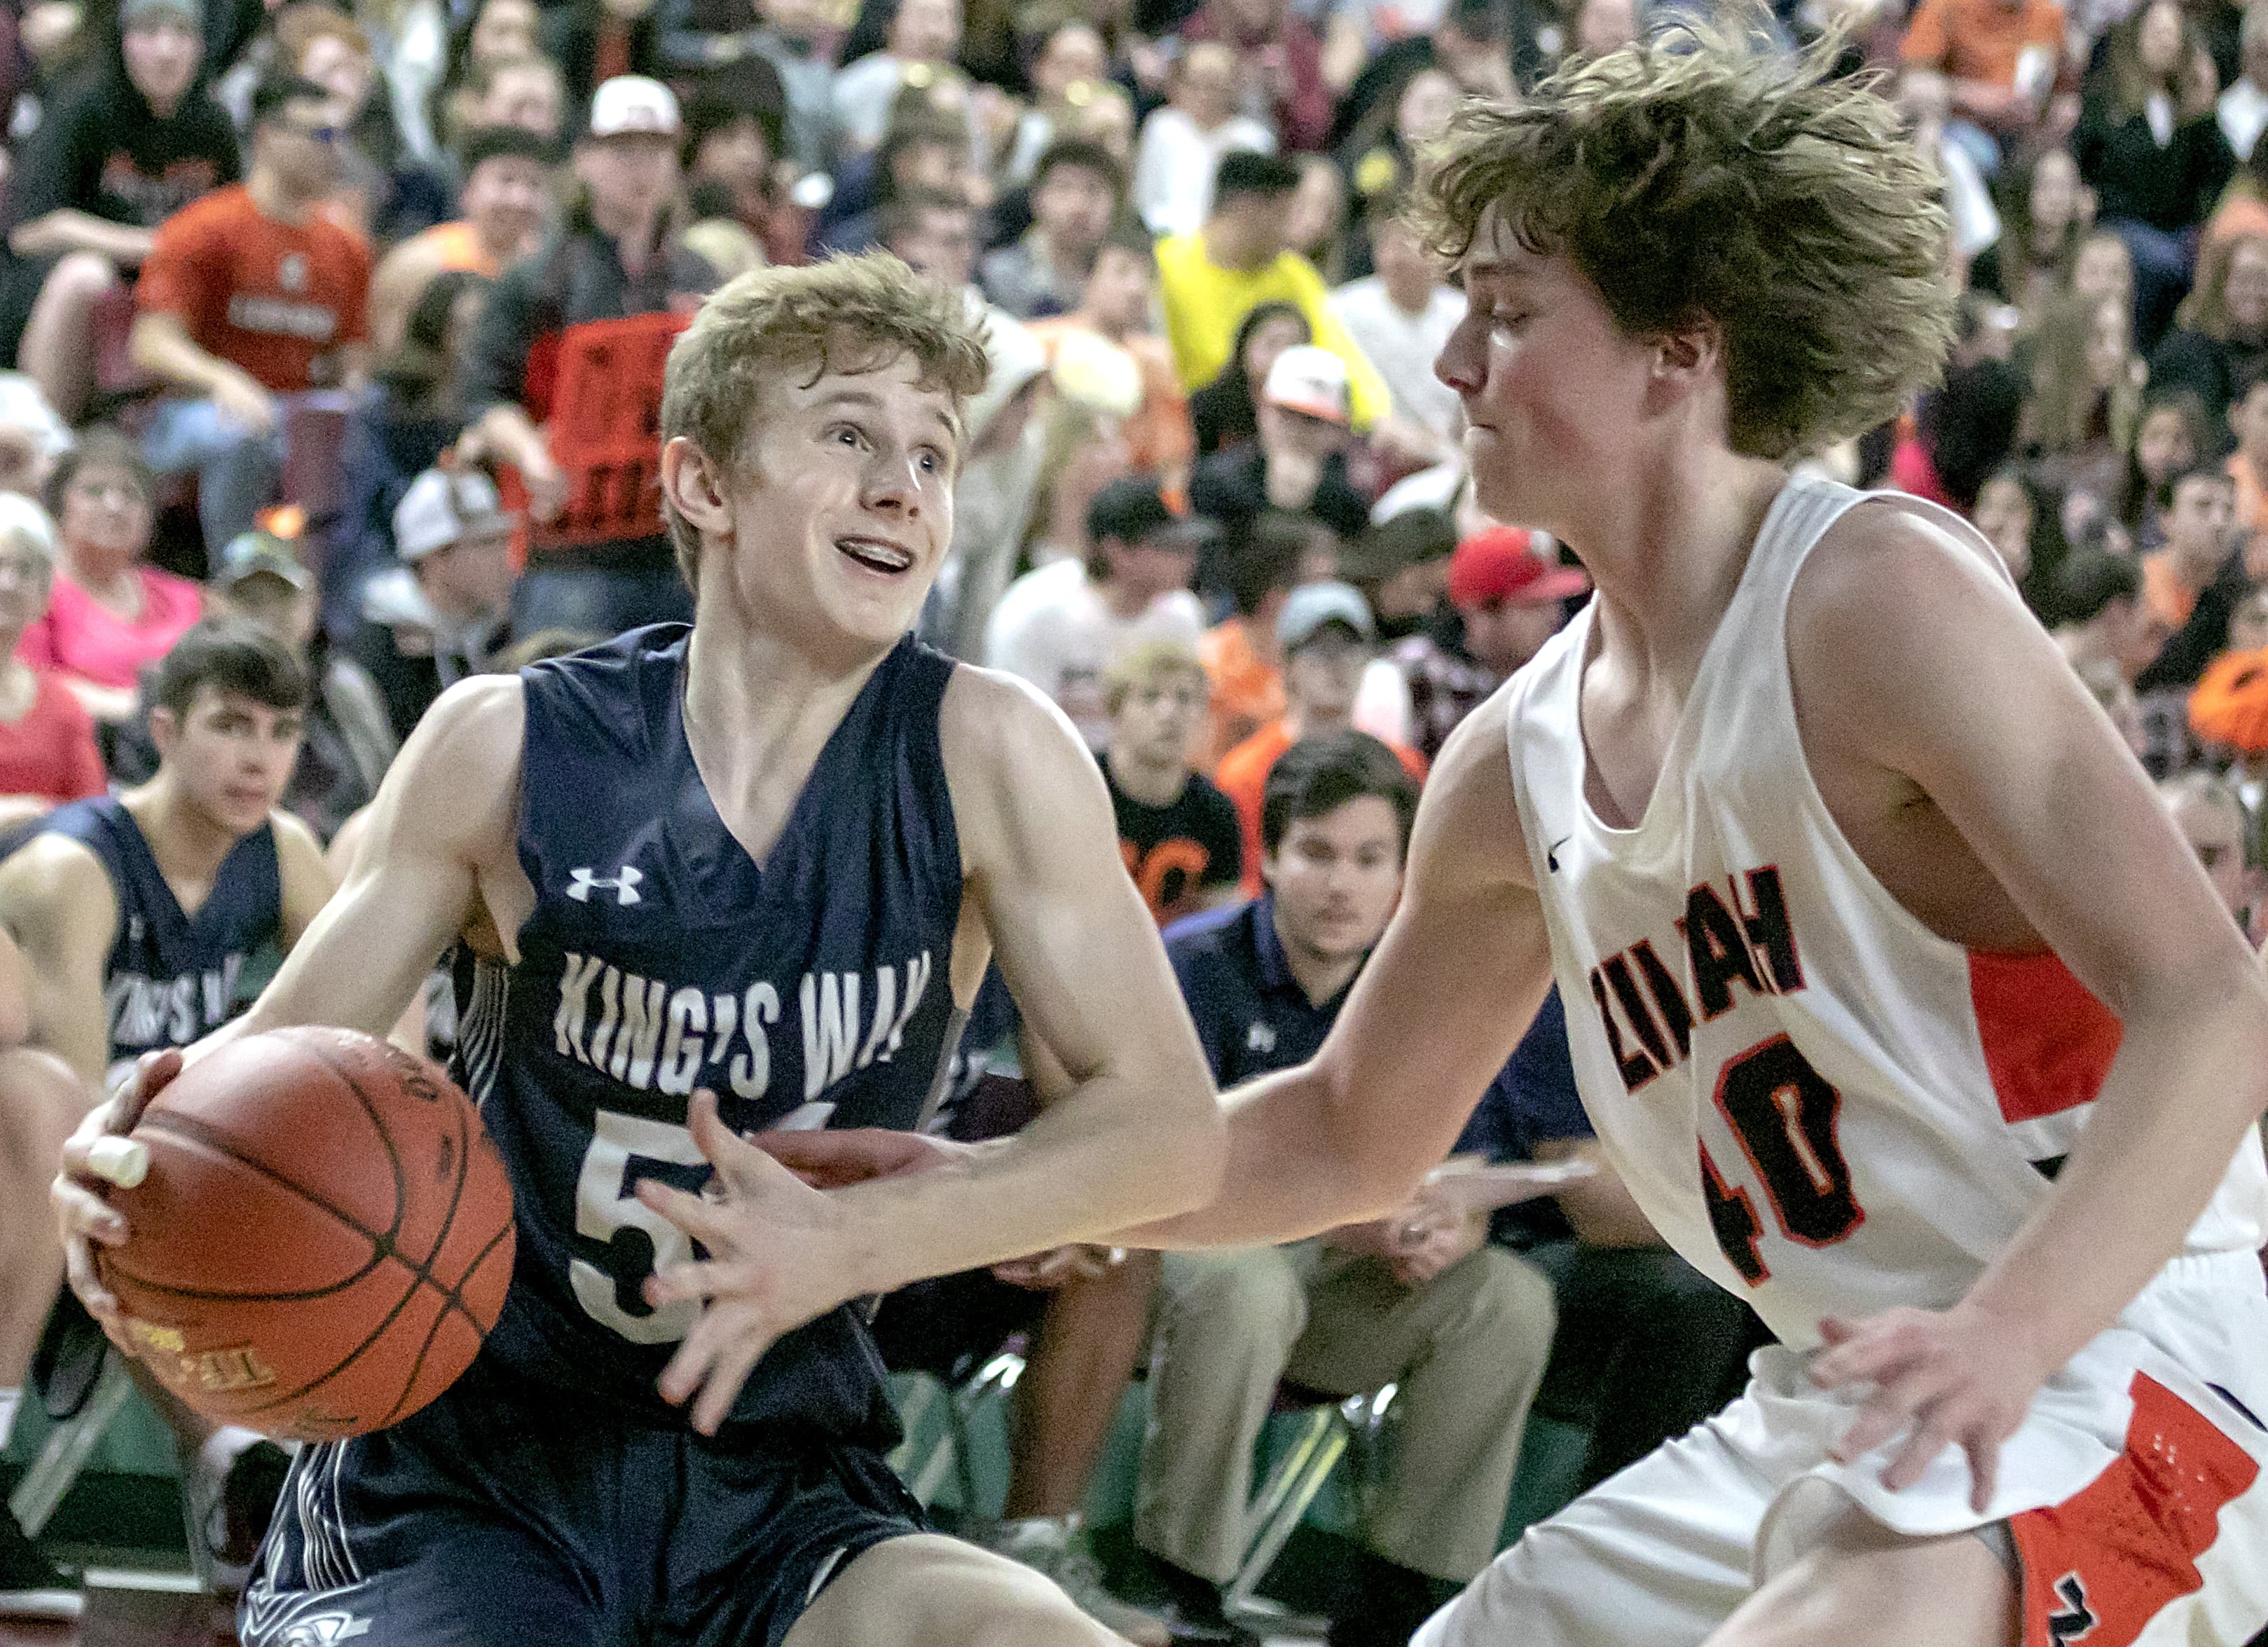 King's Way's Bryson Metz (55), goes for two points around Zillah's Claysen Delp (40), during the WIAA 1A boys state championships on Saturday, Mar. 2, 2019, at the Yakima Valley SunDome. The Zillah Leopards defeated the King's Way Christian Knights 90-68.